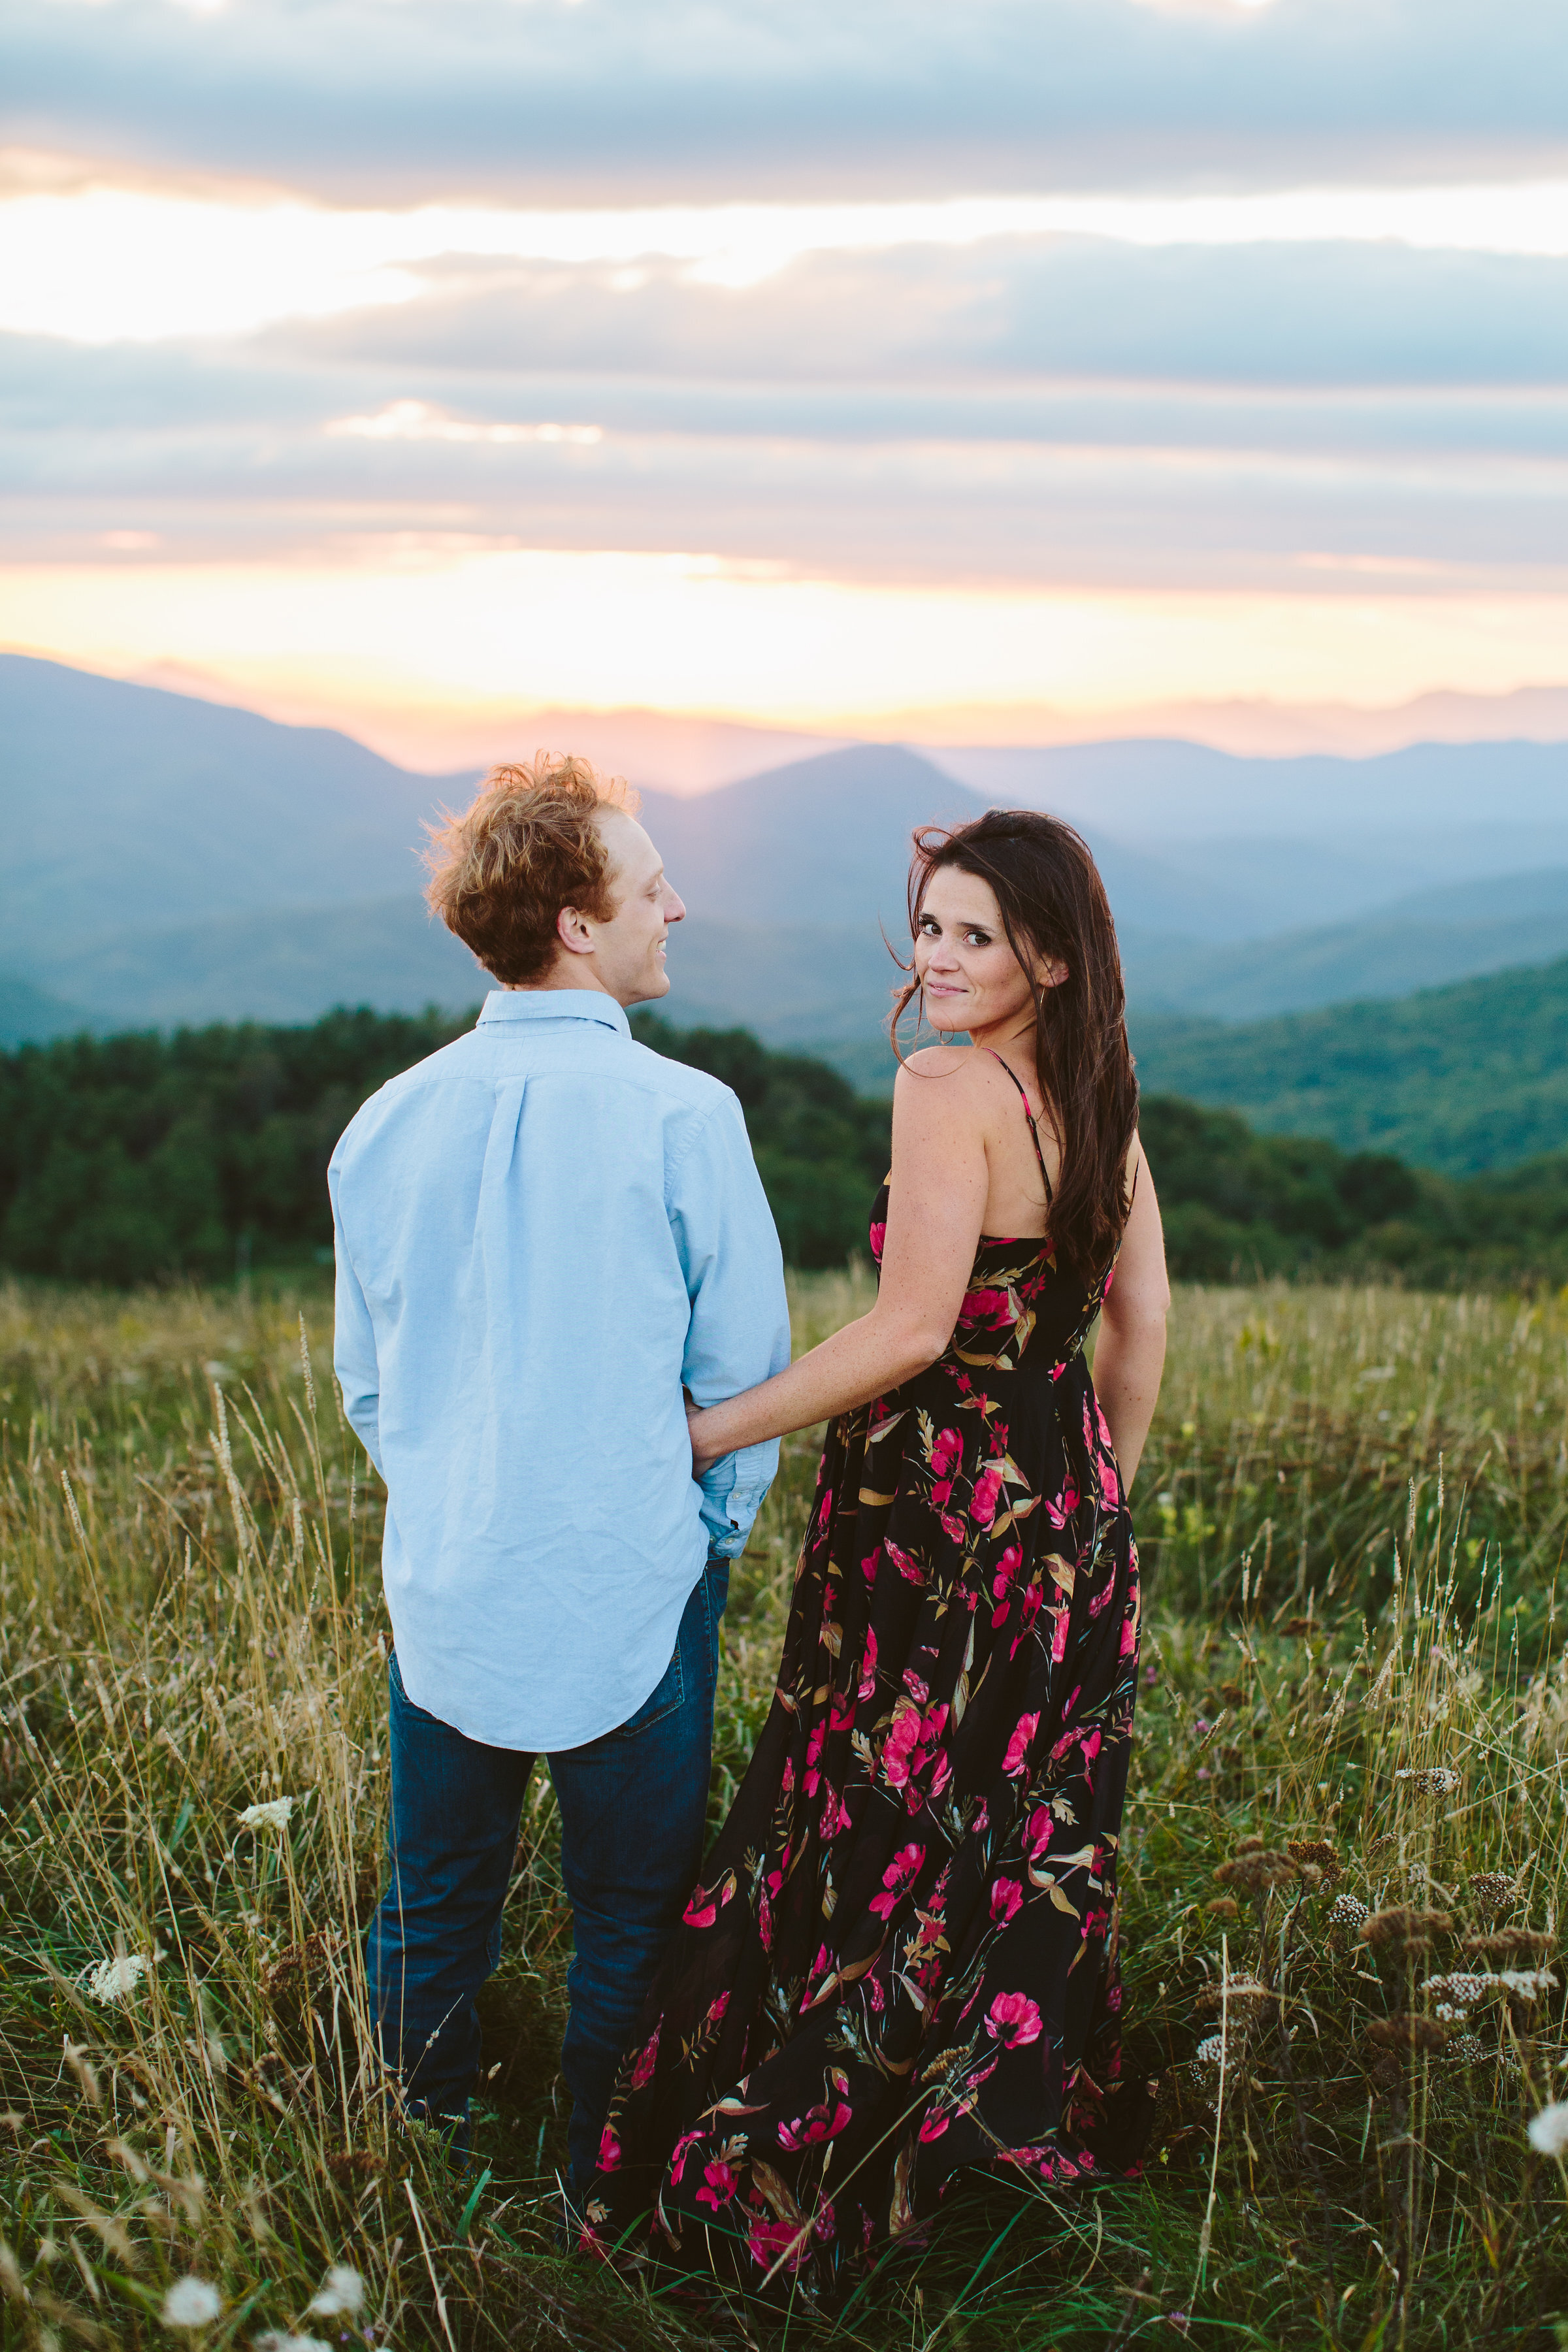 Max Patch Summer Engagement Photos on the Mountain at Sunset